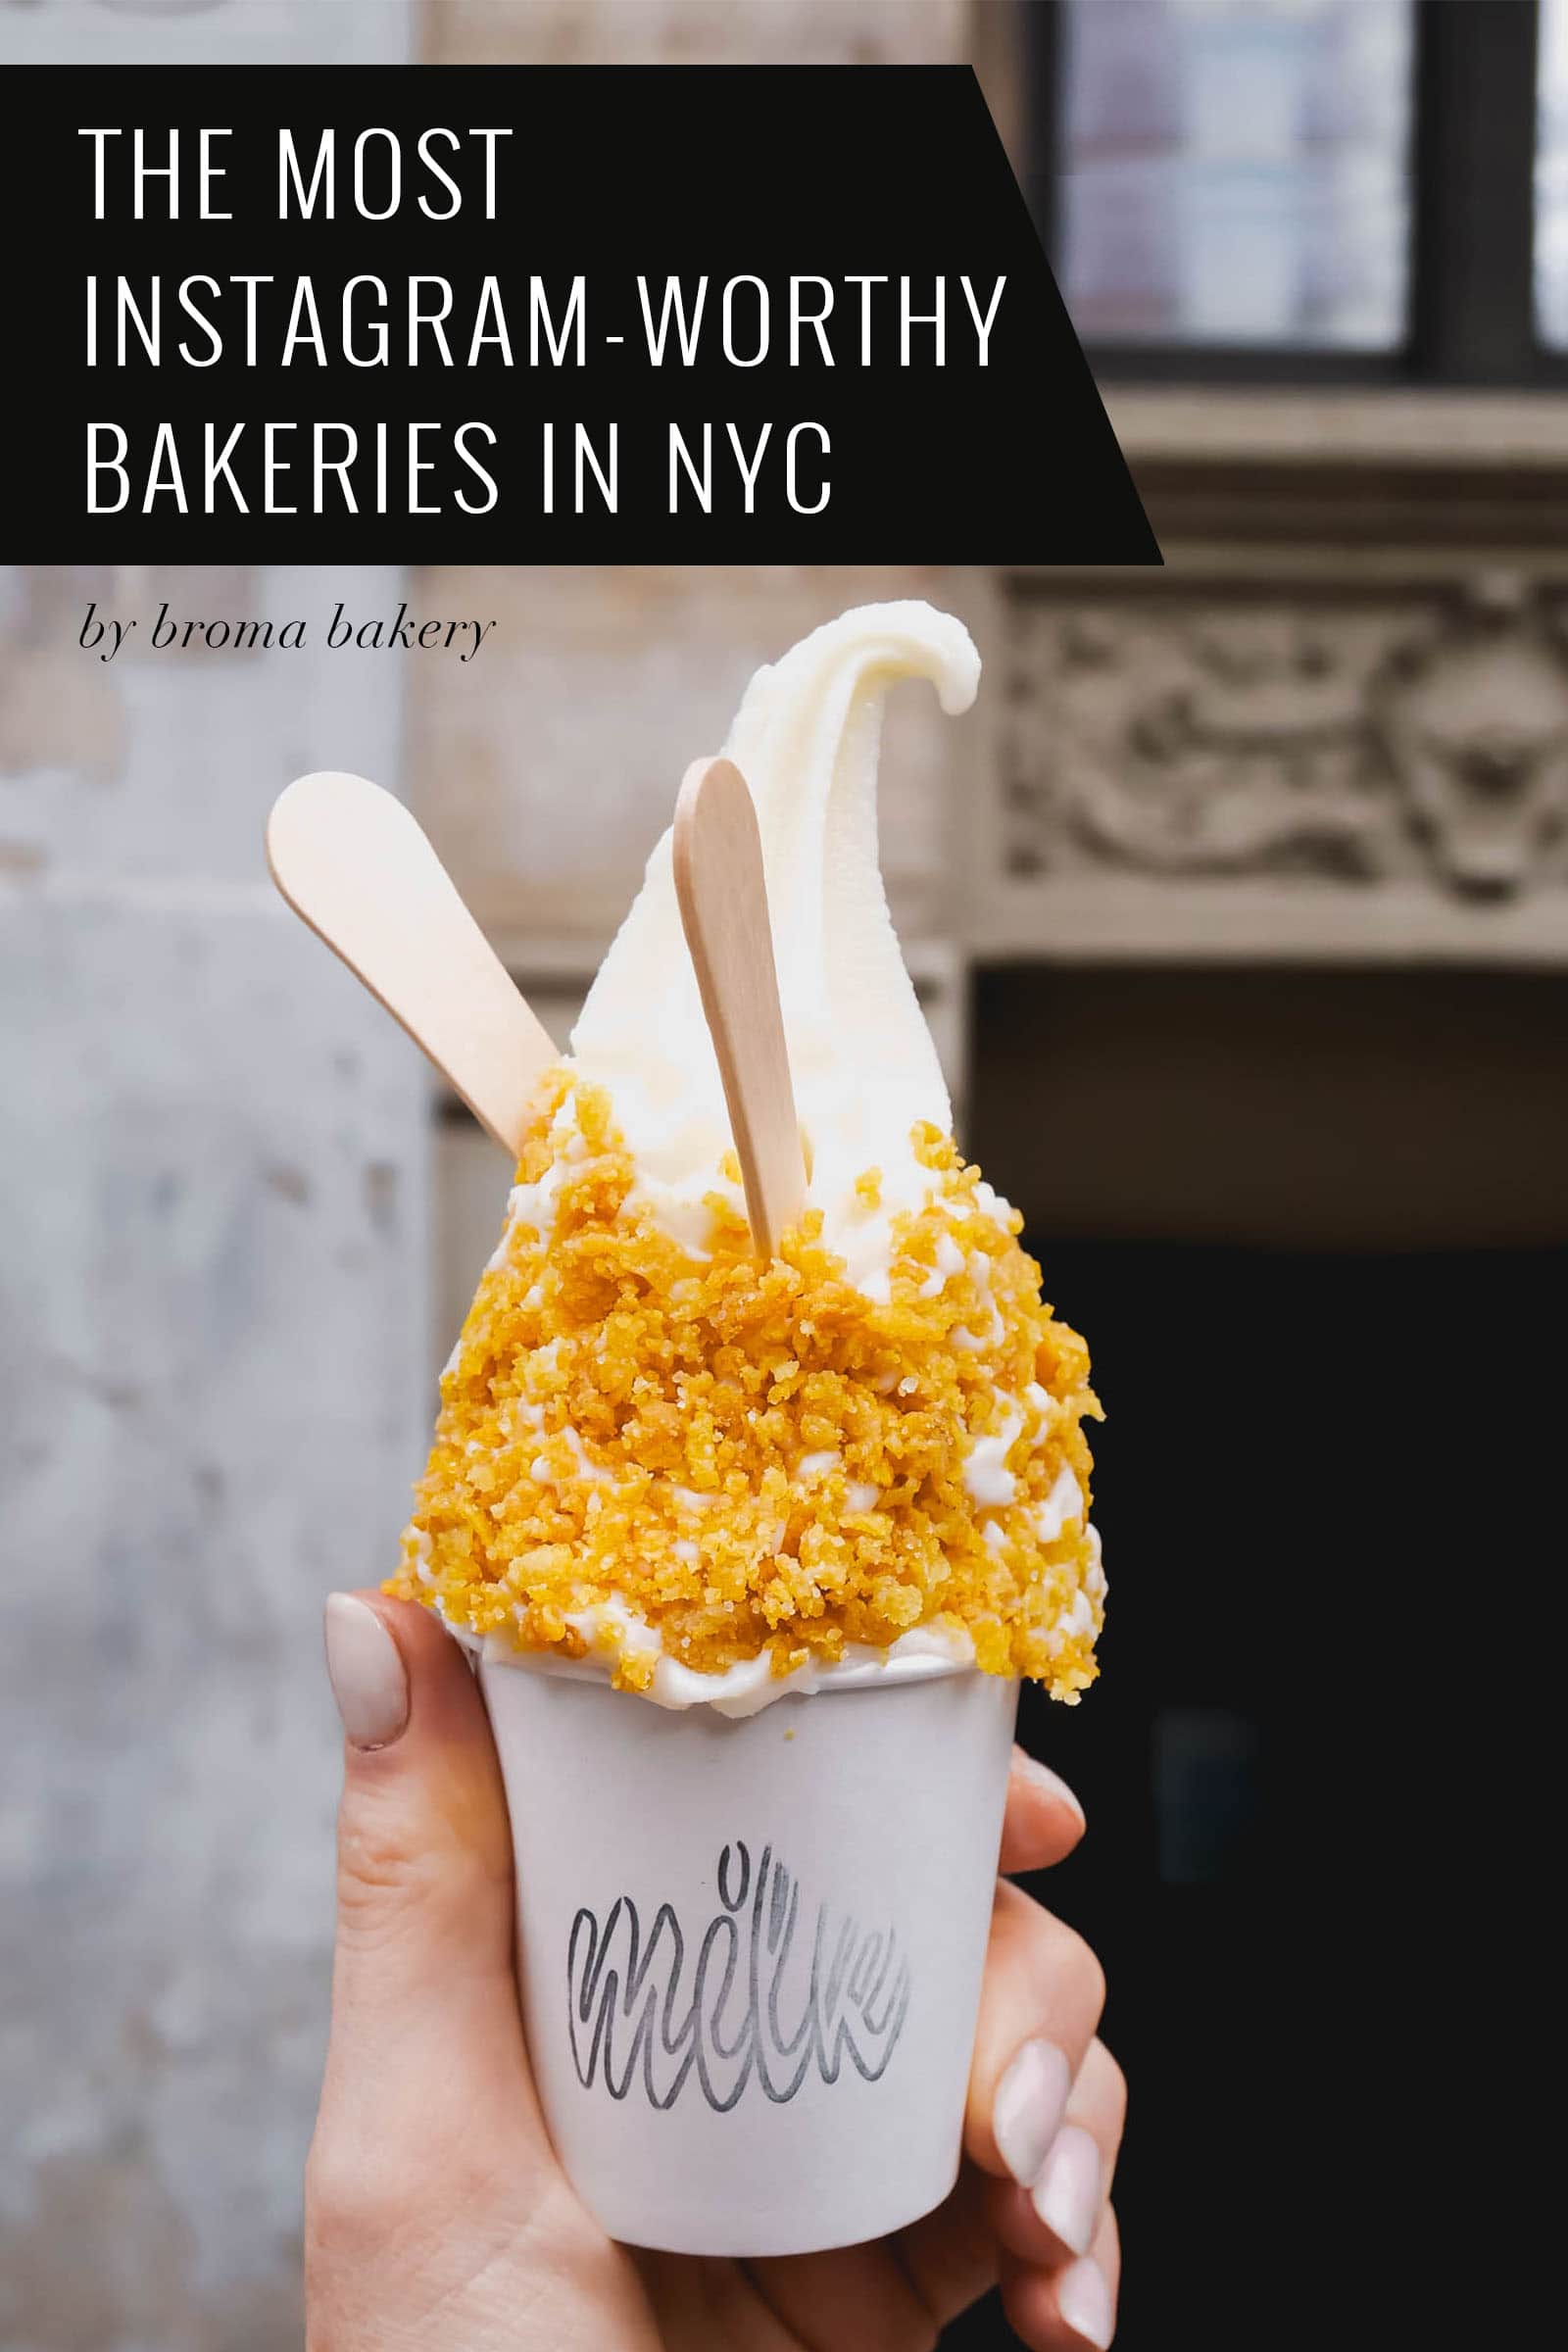 11 of the most Instagram-Worthy bakeries in NYC